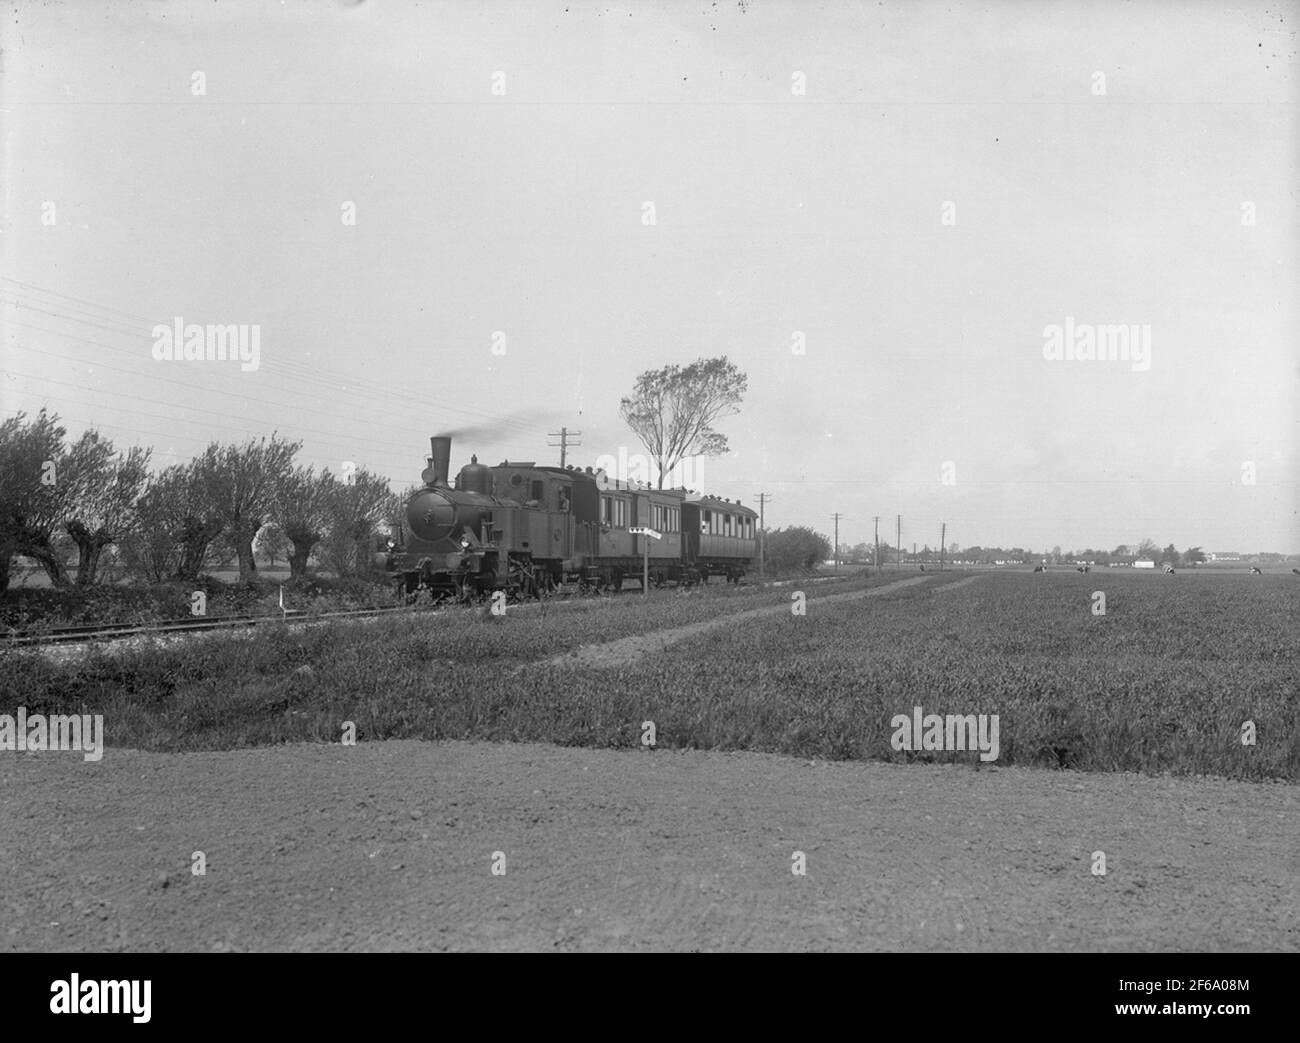 Bend Lok 6. Steam locomotive with passenger cars. Translated1934 to bend 52. LOK Made from 1918 of Nohab with the axis sequence 1c. Manufacturing number 1131.Scrased in 1955. Stock Photo